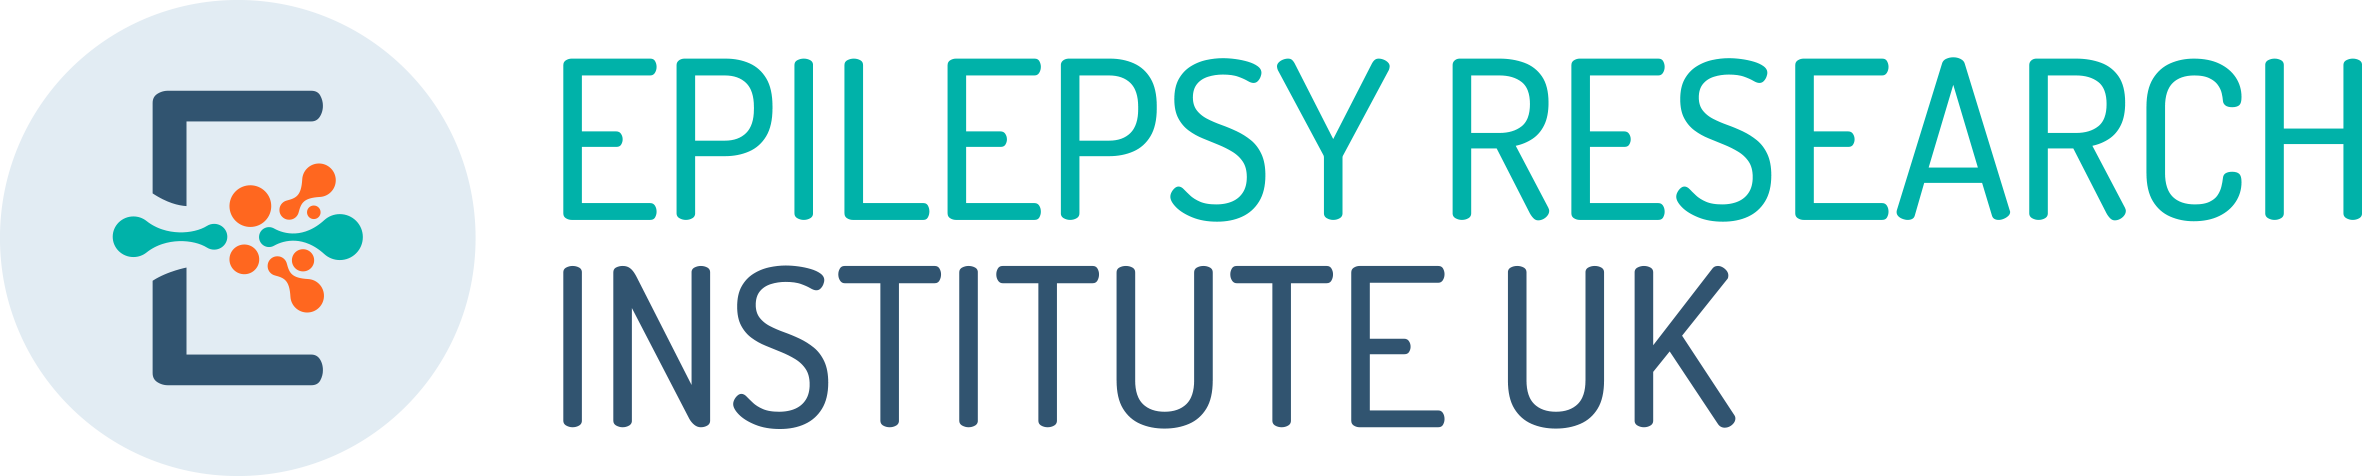 The Epilepsy Research Institute